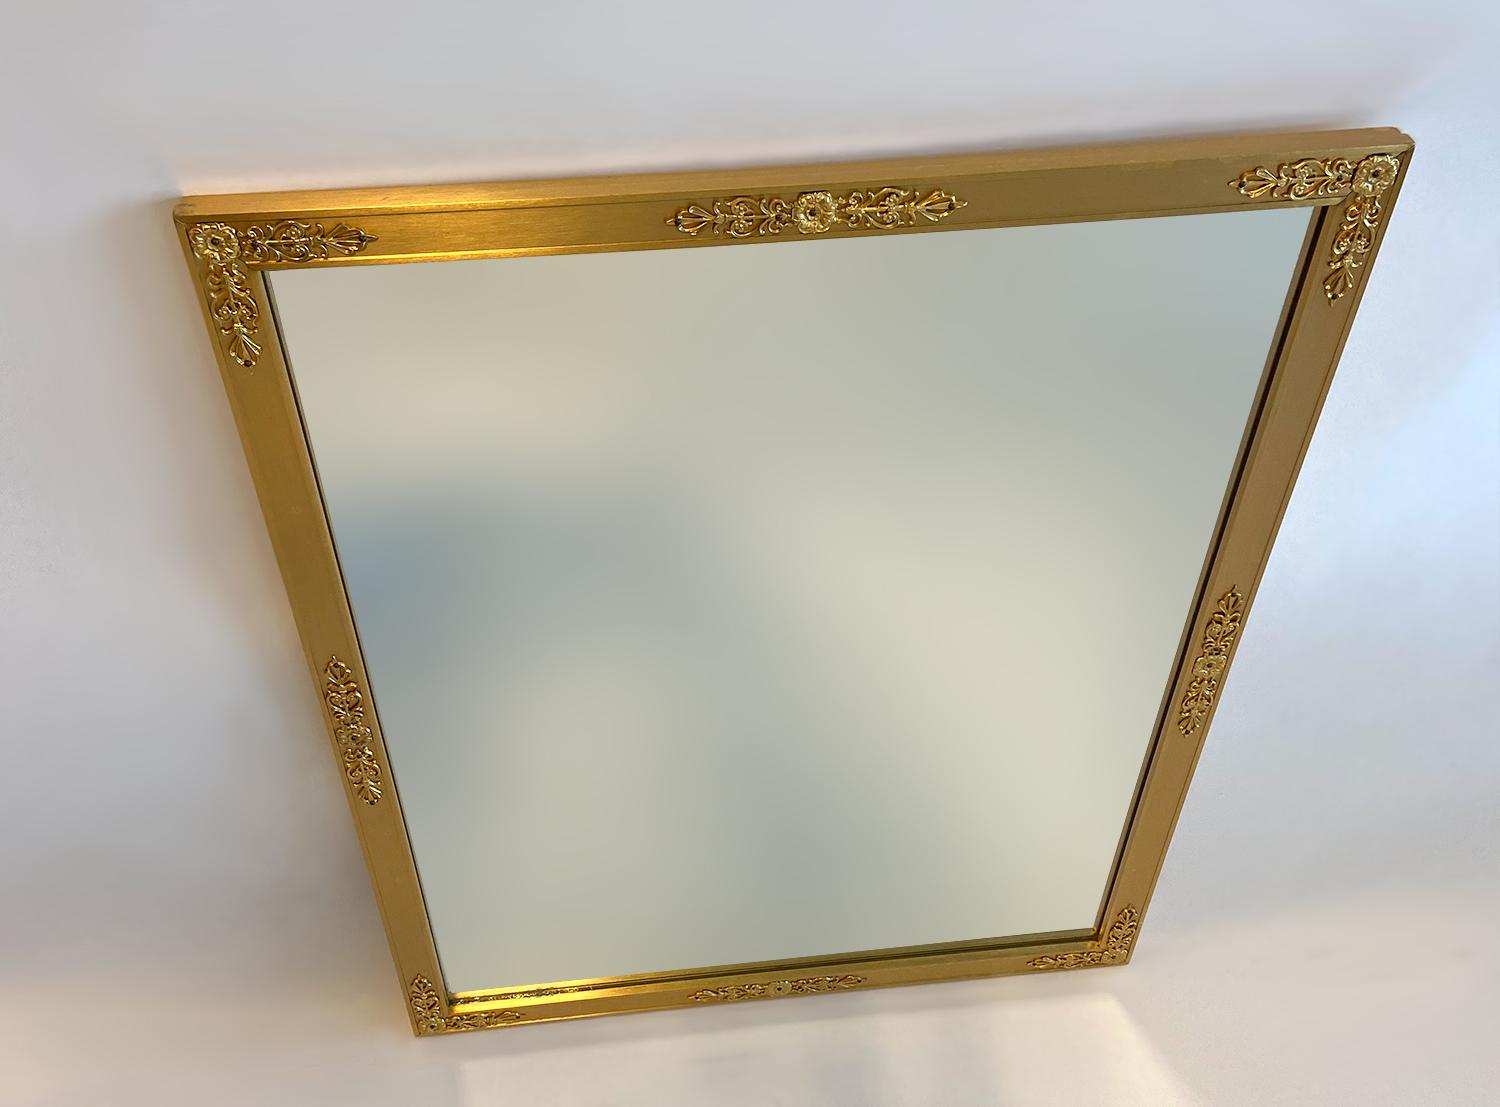 Sherle Wagner filigree mirror small in gold vintage condition gold plate over brass or bronze construction Wired for vertical hanging. From the Sherle Wagner International Heritage Collection. Custom sized 27.25